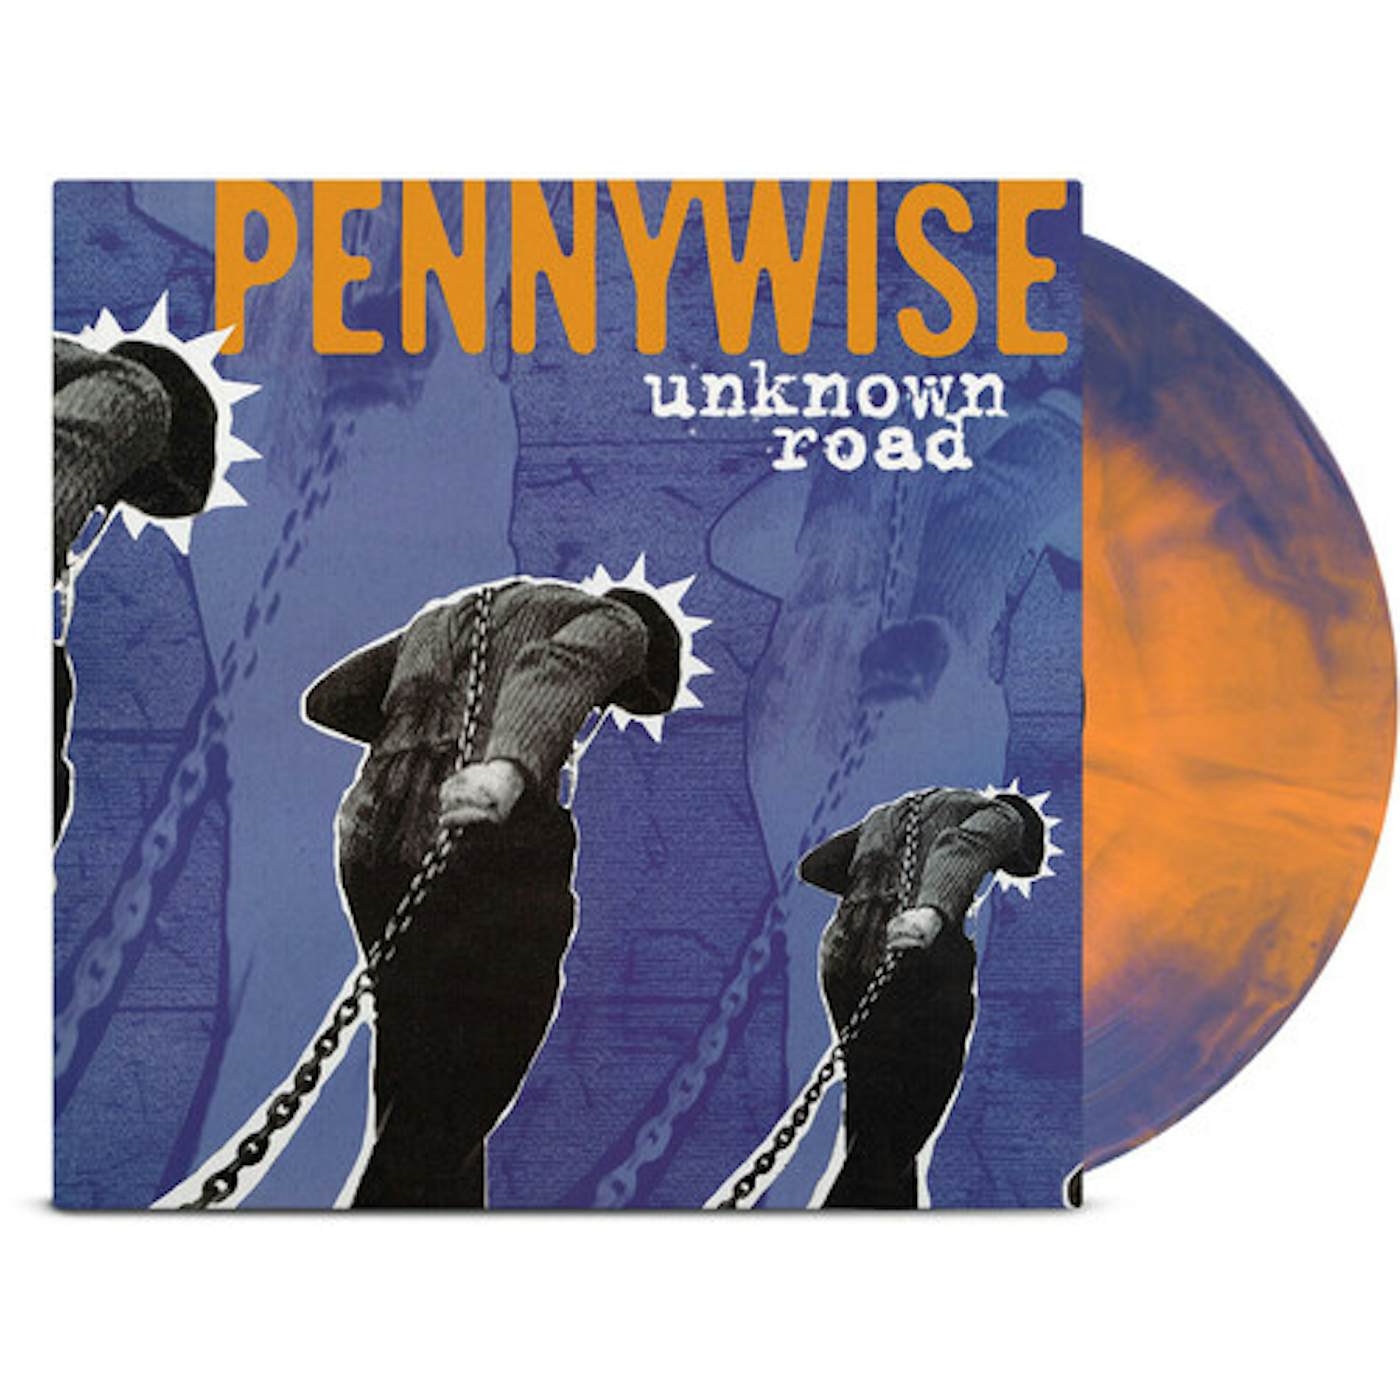 Pennywise UNKNOWN ROAD - OPAQUE ORANGE Vinyl Record